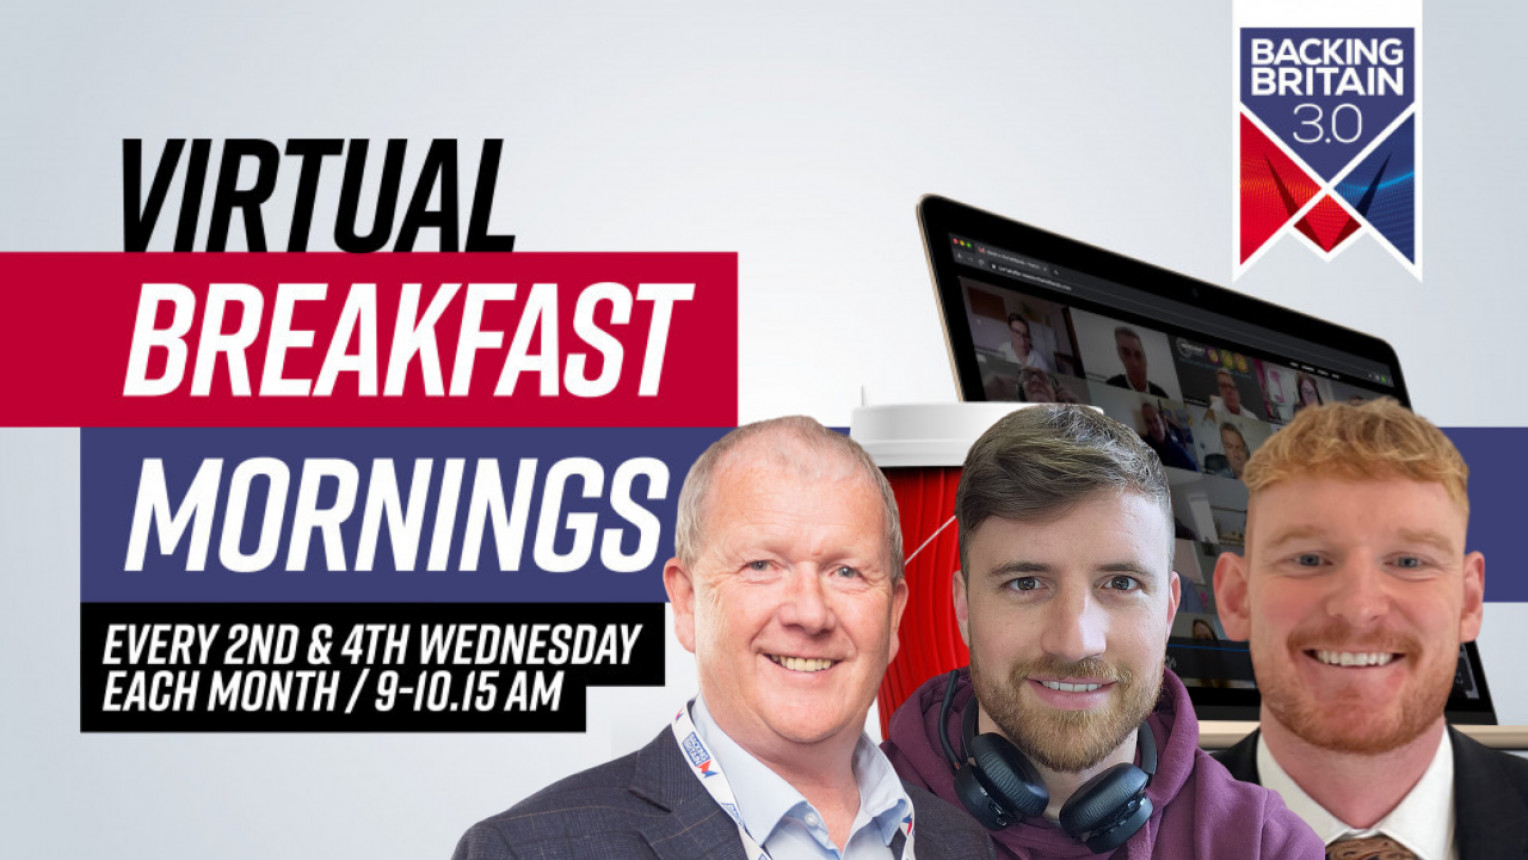 Backing Britain Virtual Breakfast Morning with MTC, FourJaw Manufacturing Analytics and Frost Electroplating